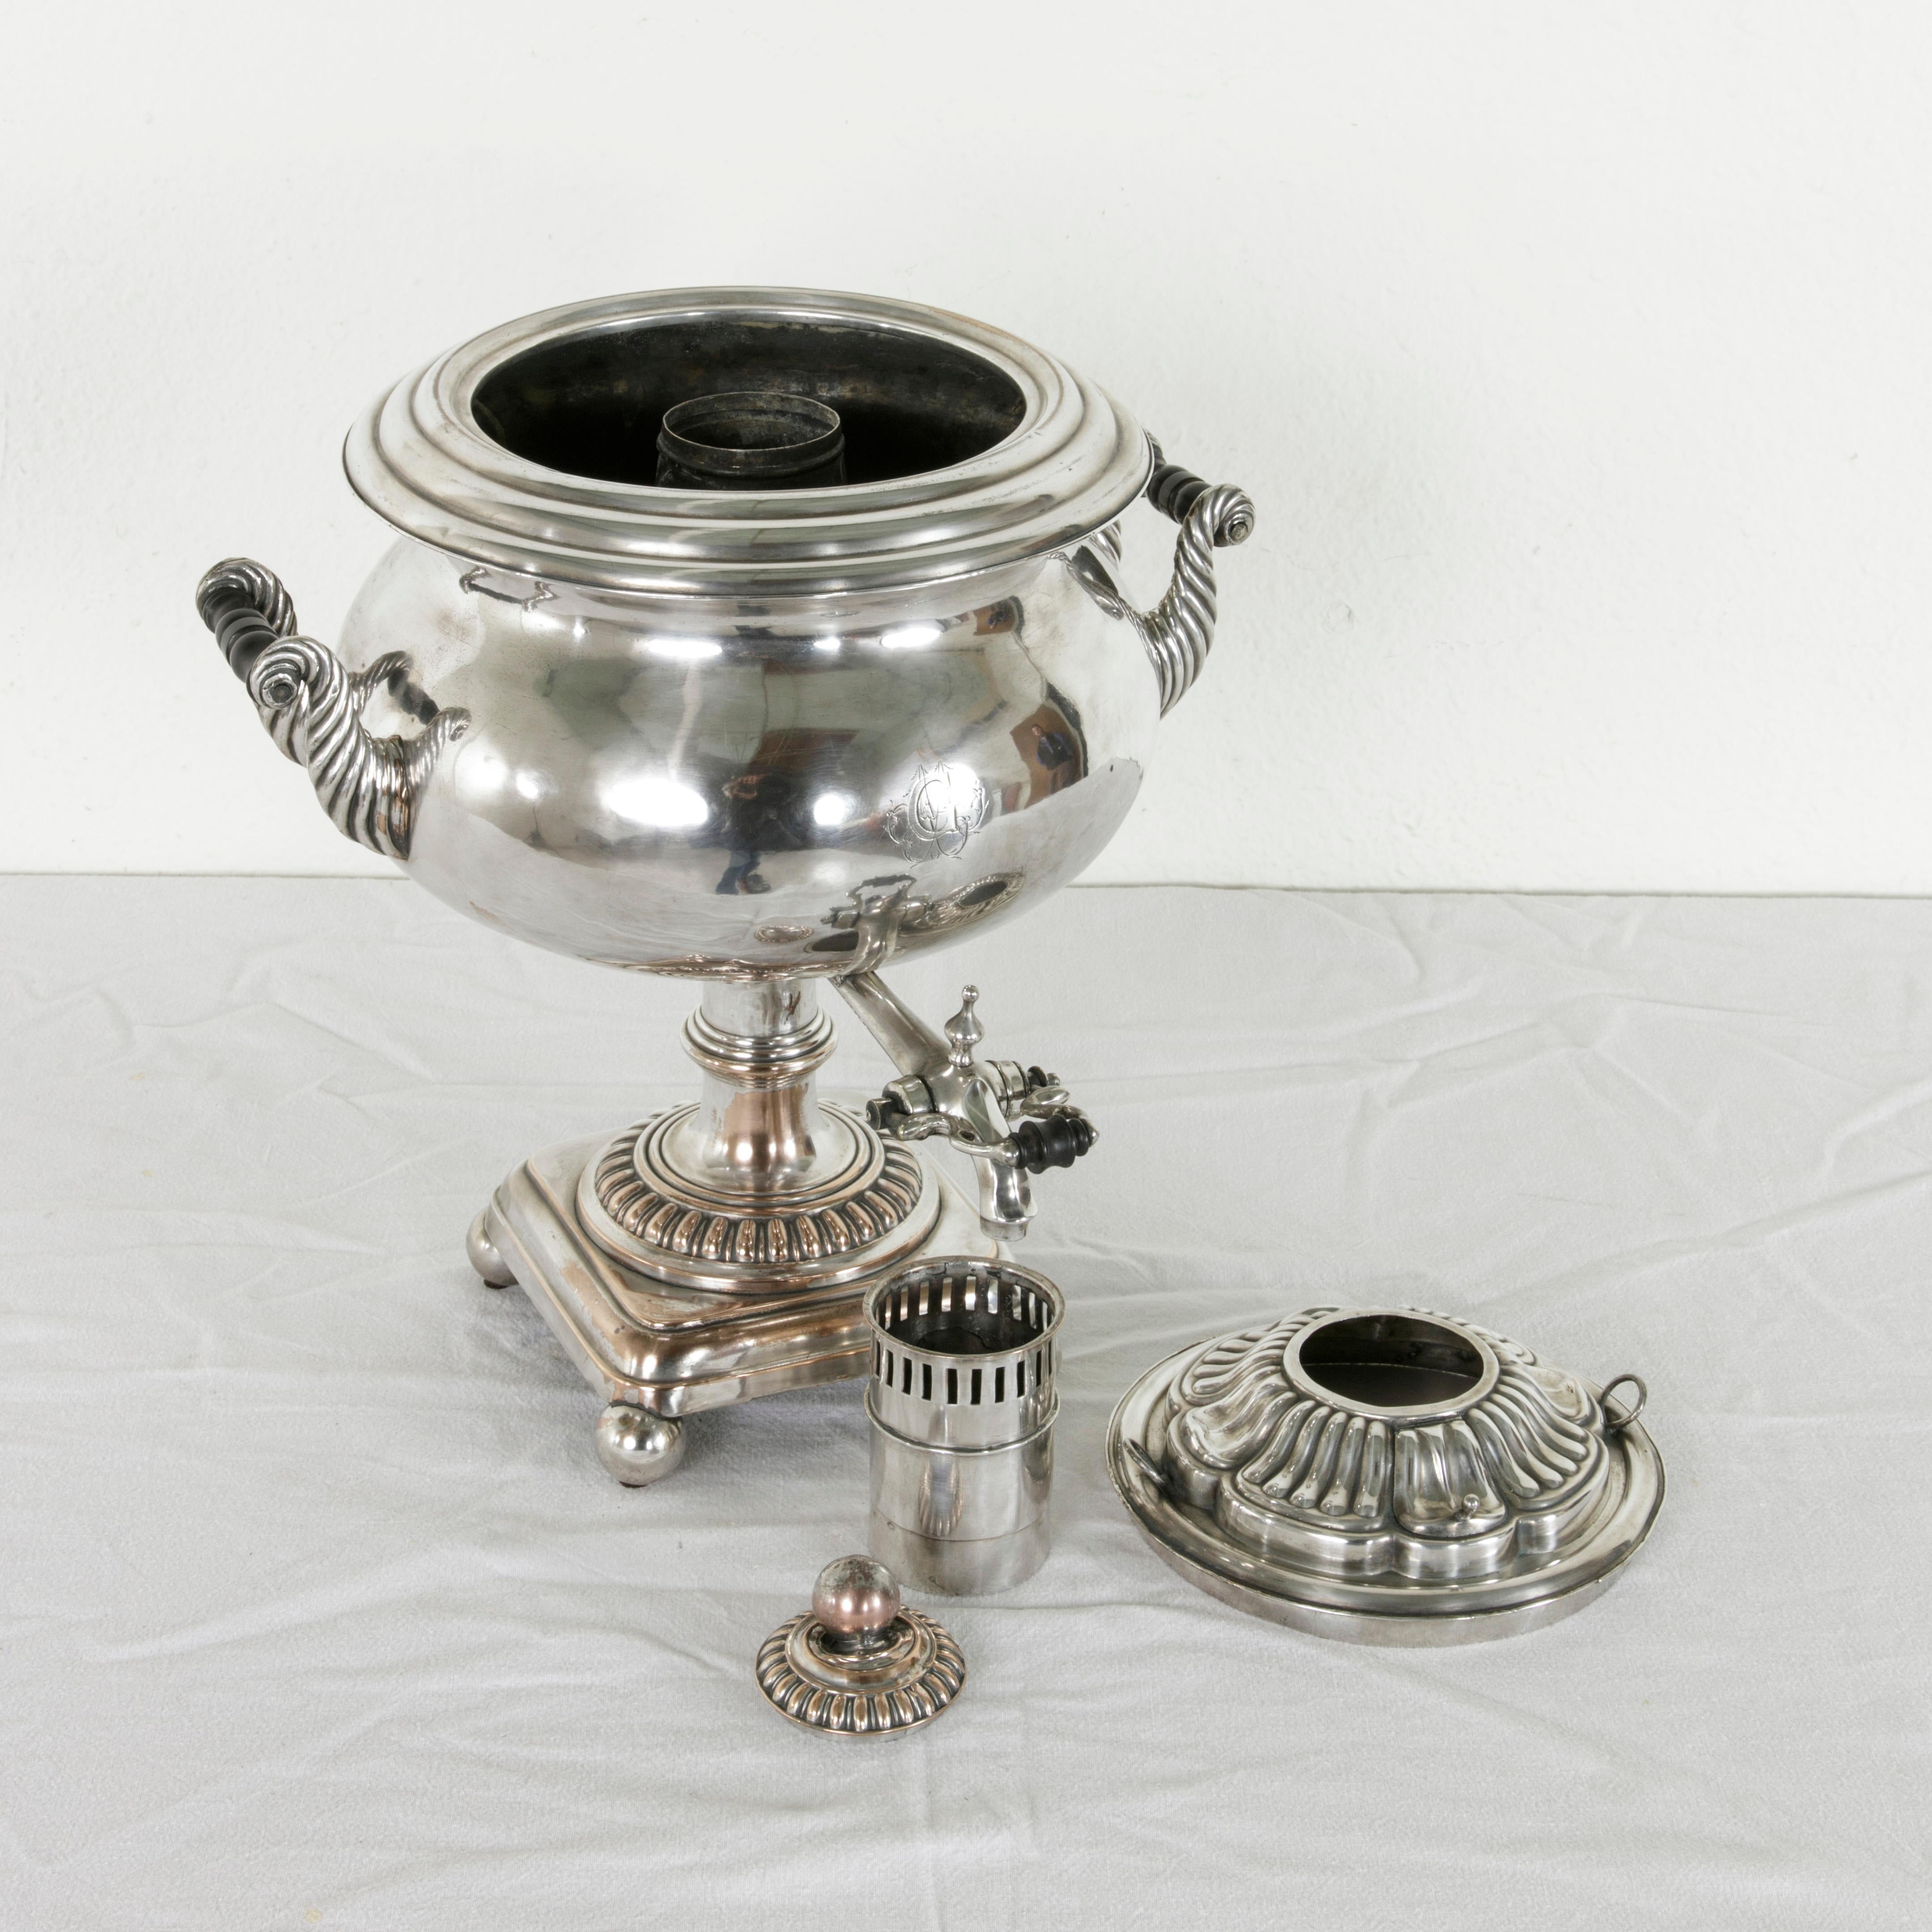 Late 19th Century Silver Samovar or Tea Urn with Lid and Ebonized Handles 6